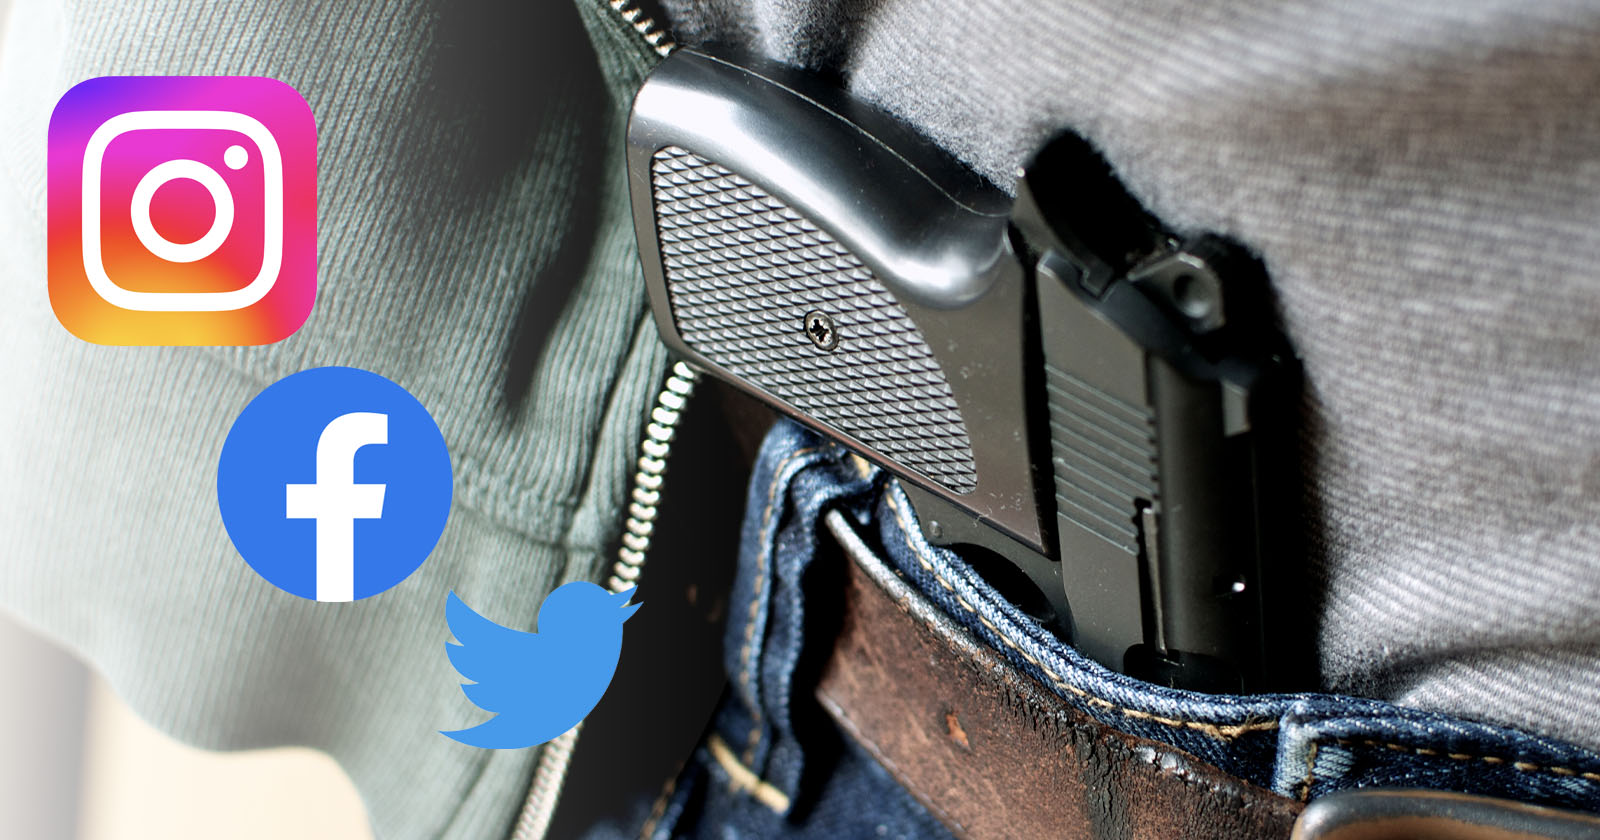 Updated NY law requires gun applicants provide social media accounts, get safety training